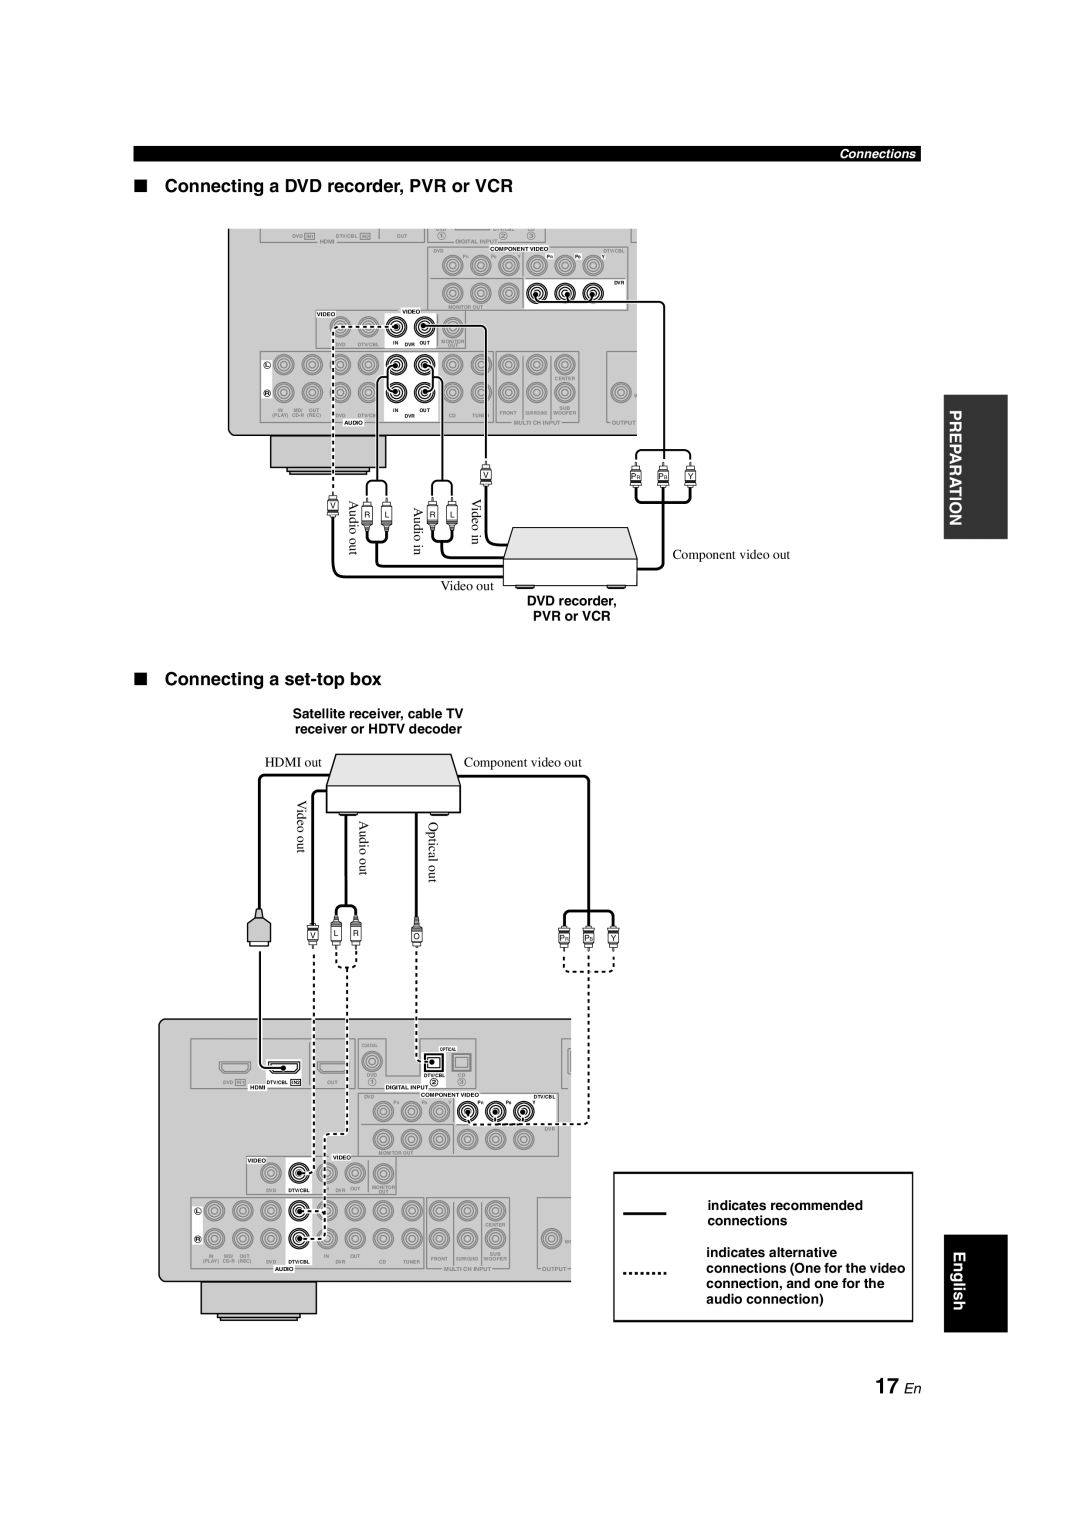 Yamaha DSP-AX463 owner manual 17 En, Connecting a DVD recorder, PVR or VCR, Connecting a set-topbox, Connections 